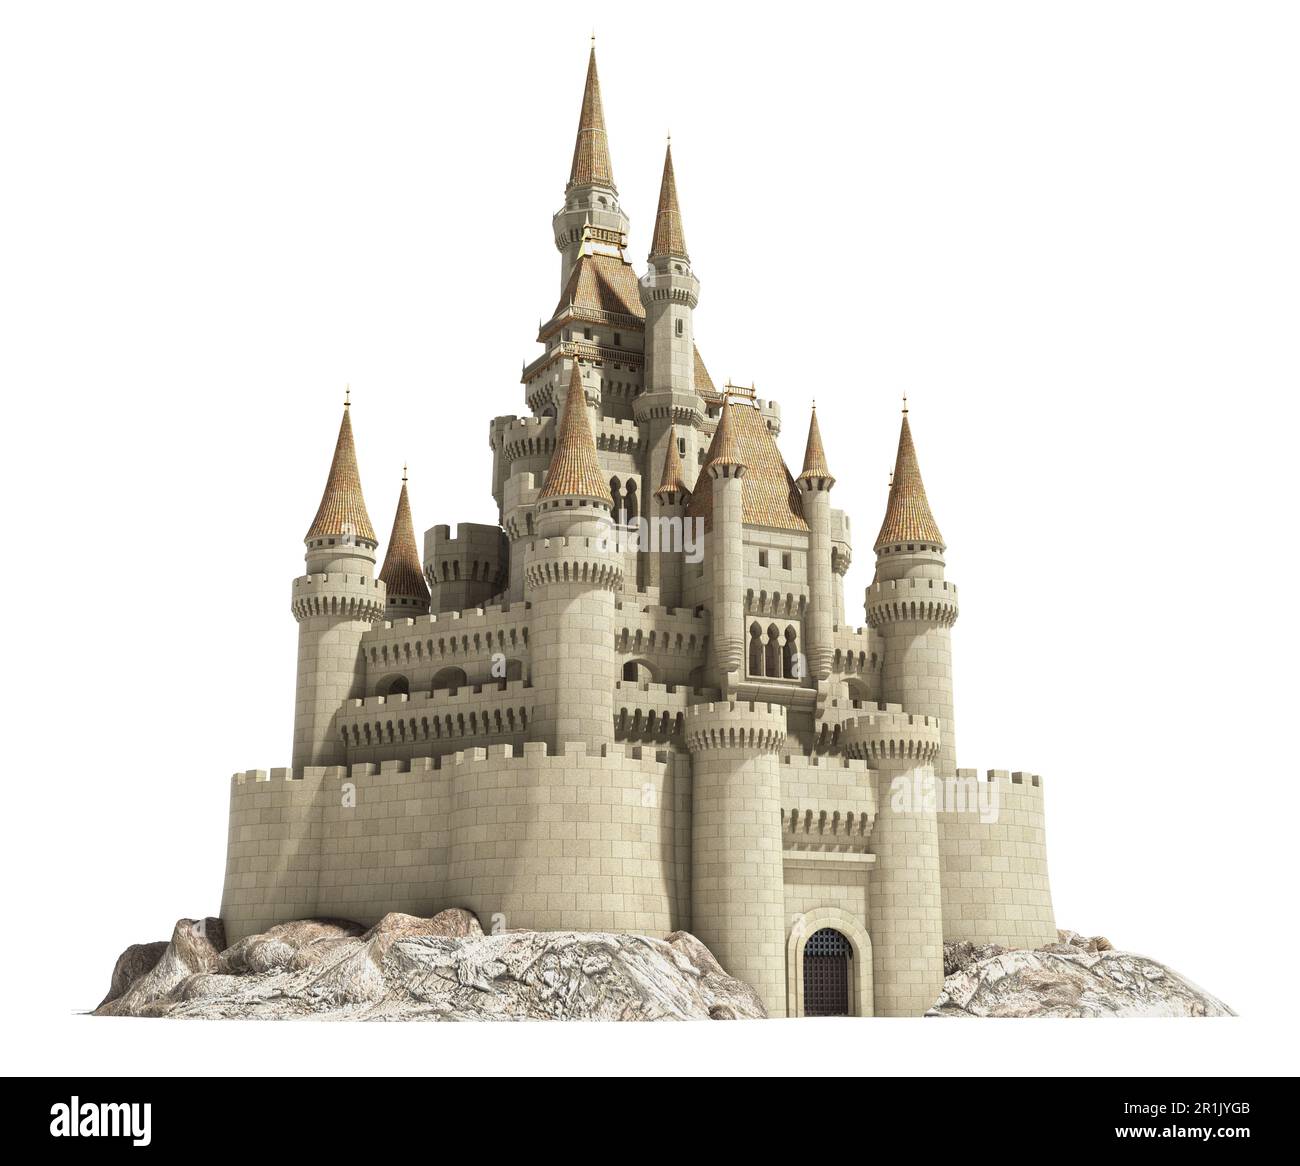 Old fairytale castle on the hill isolated on white. 3d illustration Stock Photo